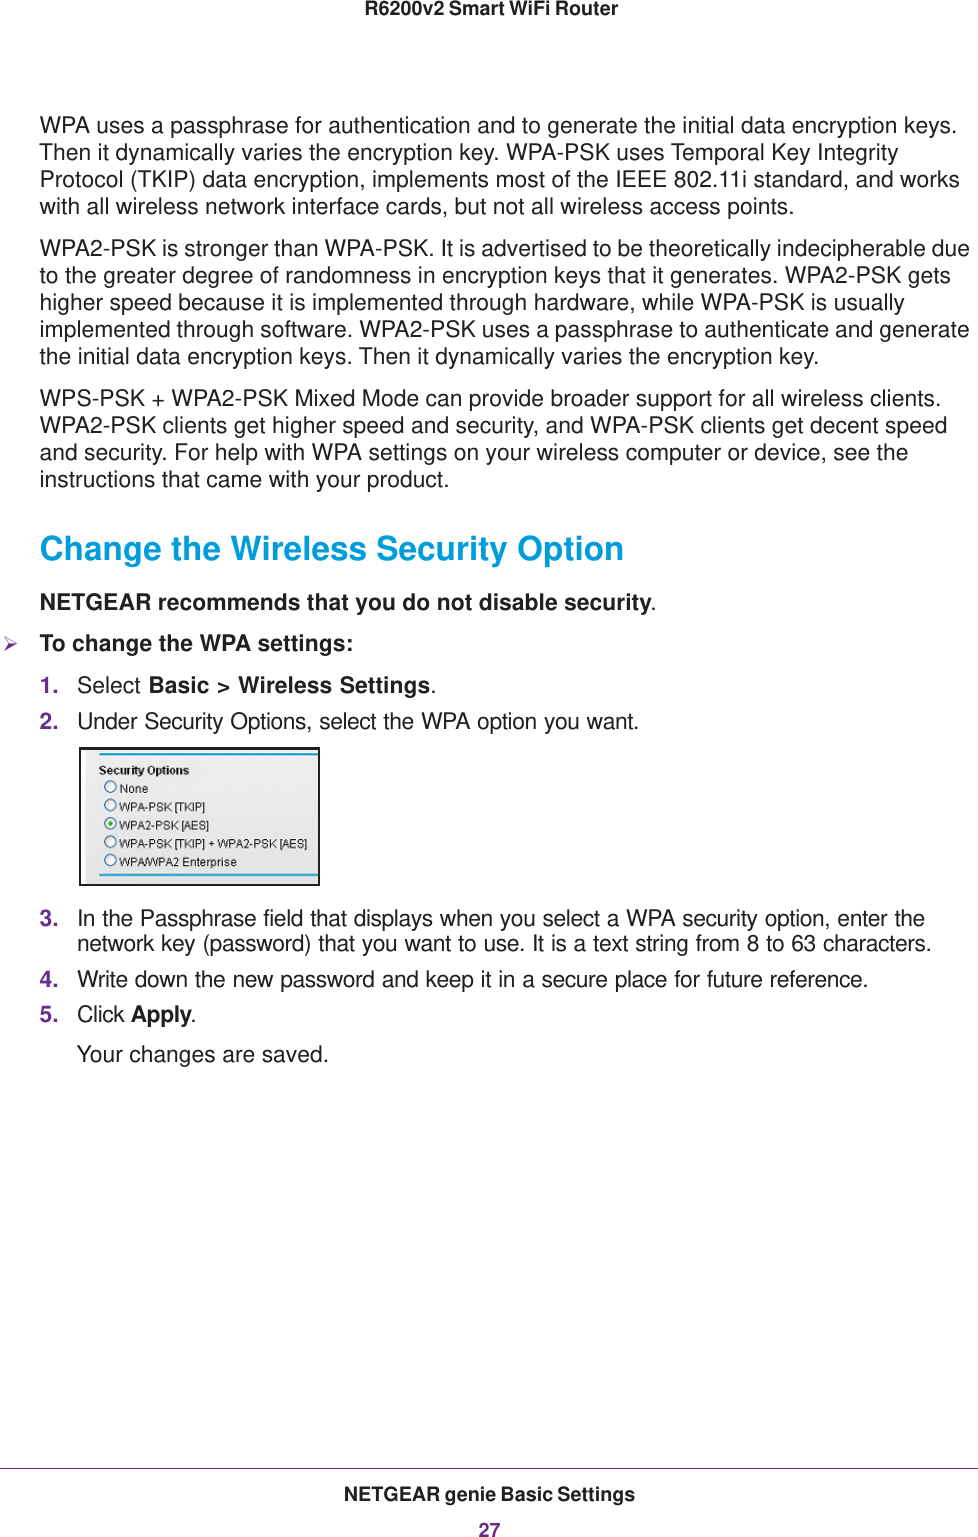 NETGEAR genie Basic Settings27 R6200v2 Smart WiFi RouterWPA uses a passphrase for authentication and to generate the initial data encryption keys. Then it dynamically varies the encryption key. WPA-PSK uses Temporal Key Integrity Protocol (TKIP) data encryption, implements most of the IEEE 802.11i standard, and works with all wireless network interface cards, but not all wireless access points. WPA2-PSK is stronger than WPA-PSK. It is advertised to be theoretically indecipherable due to the greater degree of randomness in encryption keys that it generates. WPA2-PSK gets higher speed because it is implemented through hardware, while WPA-PSK is usually implemented through software. WPA2-PSK uses a passphrase to authenticate and generate the initial data encryption keys. Then it dynamically varies the encryption key. WPS-PSK + WPA2-PSK Mixed Mode can provide broader support for all wireless clients. WPA2-PSK clients get higher speed and security, and WPA-PSK clients get decent speed and security. For help with WPA settings on your wireless computer or device, see the instructions that came with your product.Change the Wireless Security OptionNETGEAR recommends that you do not disable security.To change the WPA settings:1. Select Basic &gt; Wireless Settings.2. Under Security Options, select the WPA option you want.3. In the Passphrase field that displays when you select a WPA security option, enter the network key (password) that you want to use. It is a text string from 8 to 63 characters.4. Write down the new password and keep it in a secure place for future reference.5. Click Apply.Your changes are saved.